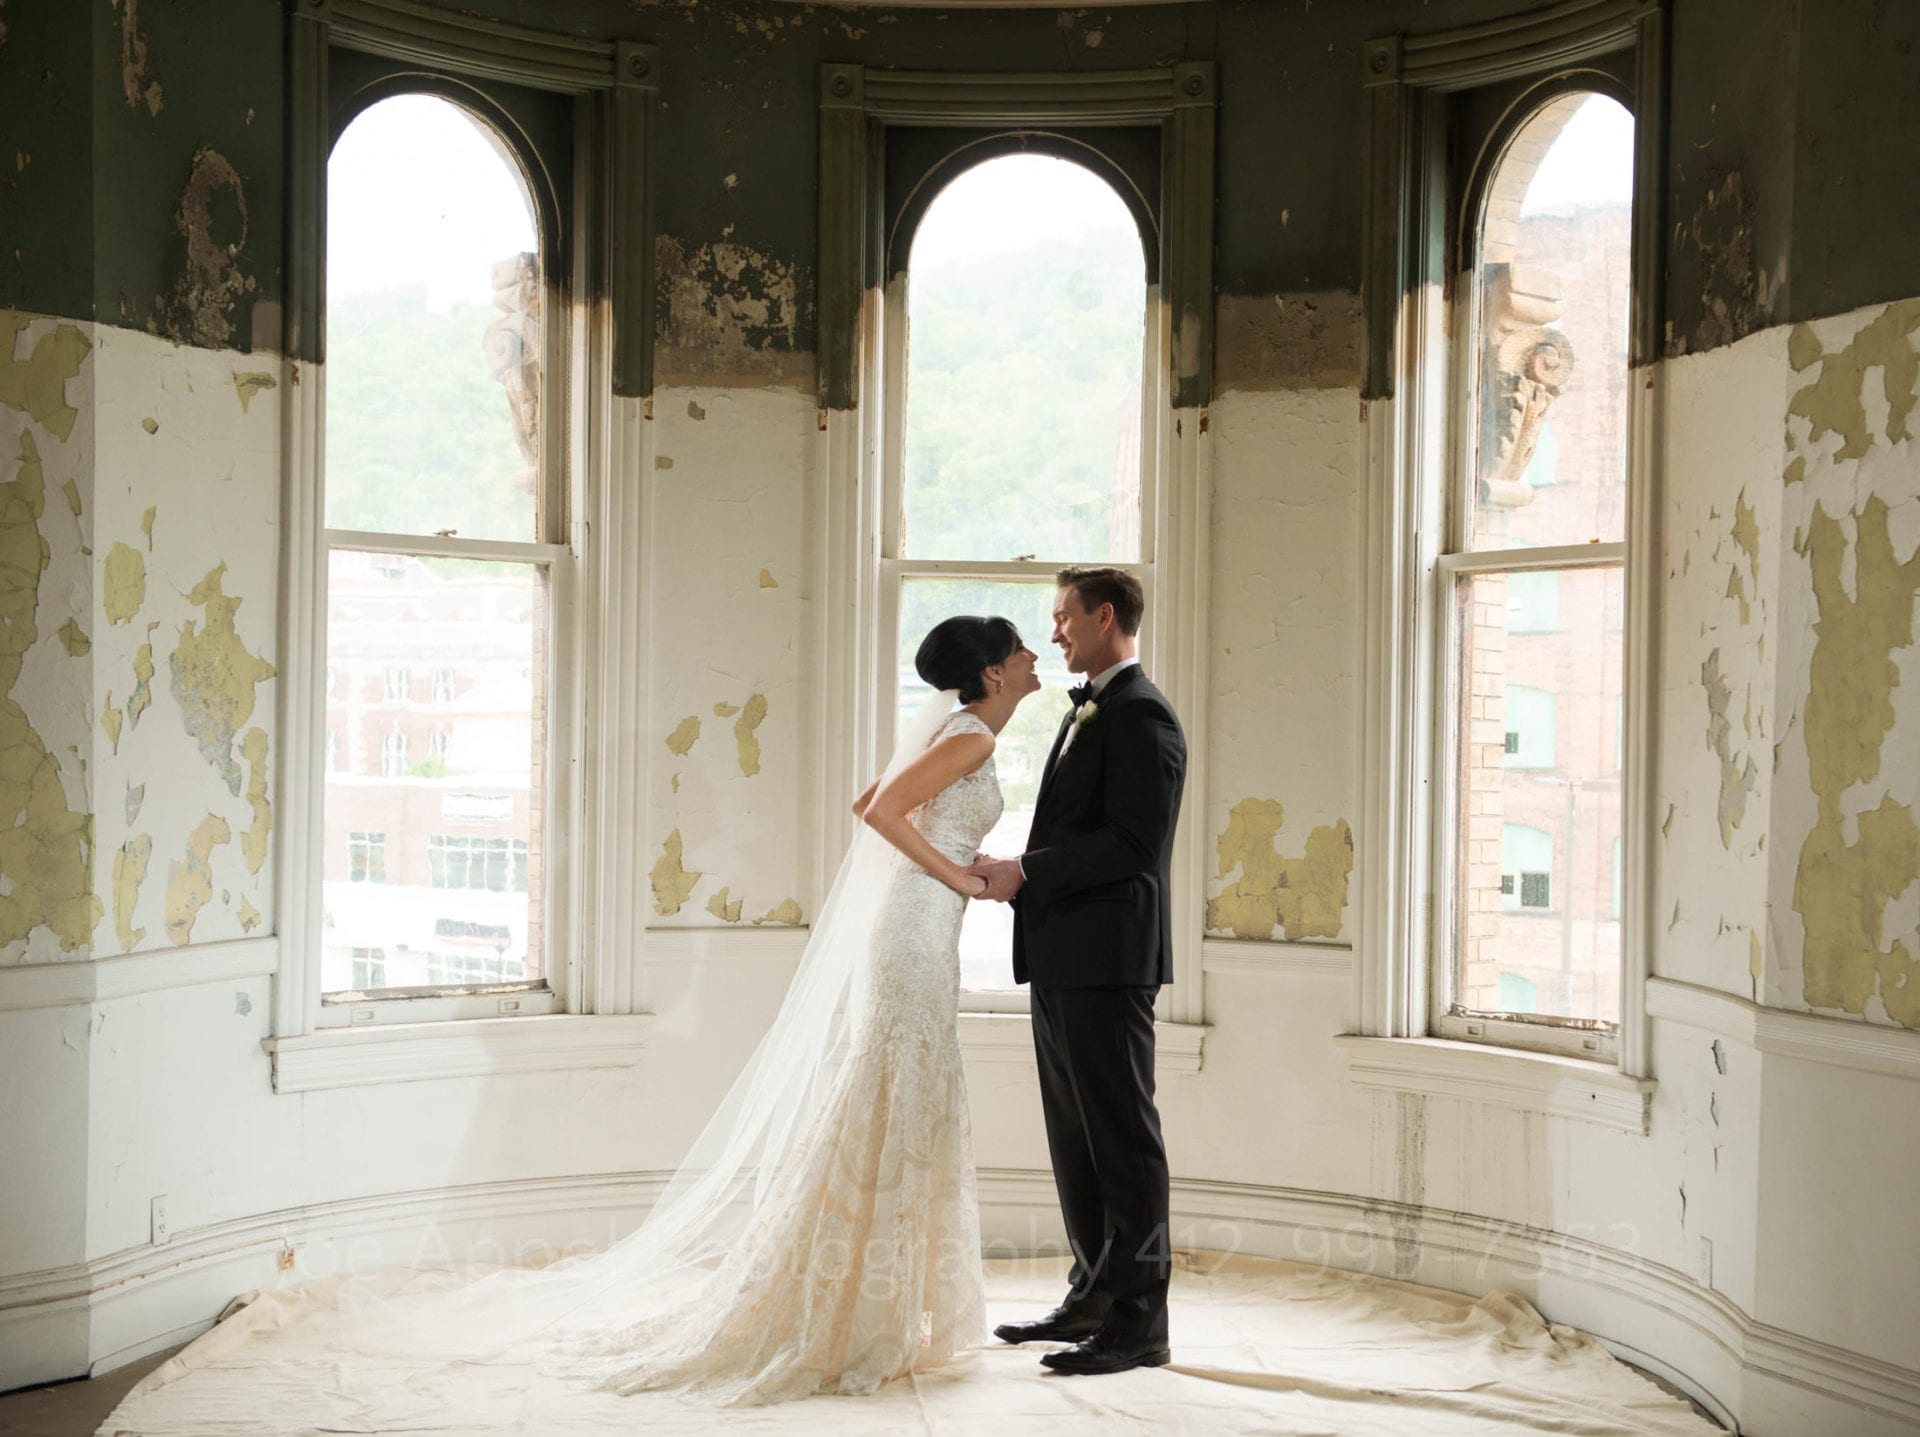 Three arched windows in the background of a bride and groom facing each other in a room with chipped paint. Wedding Photography In West Virginia.